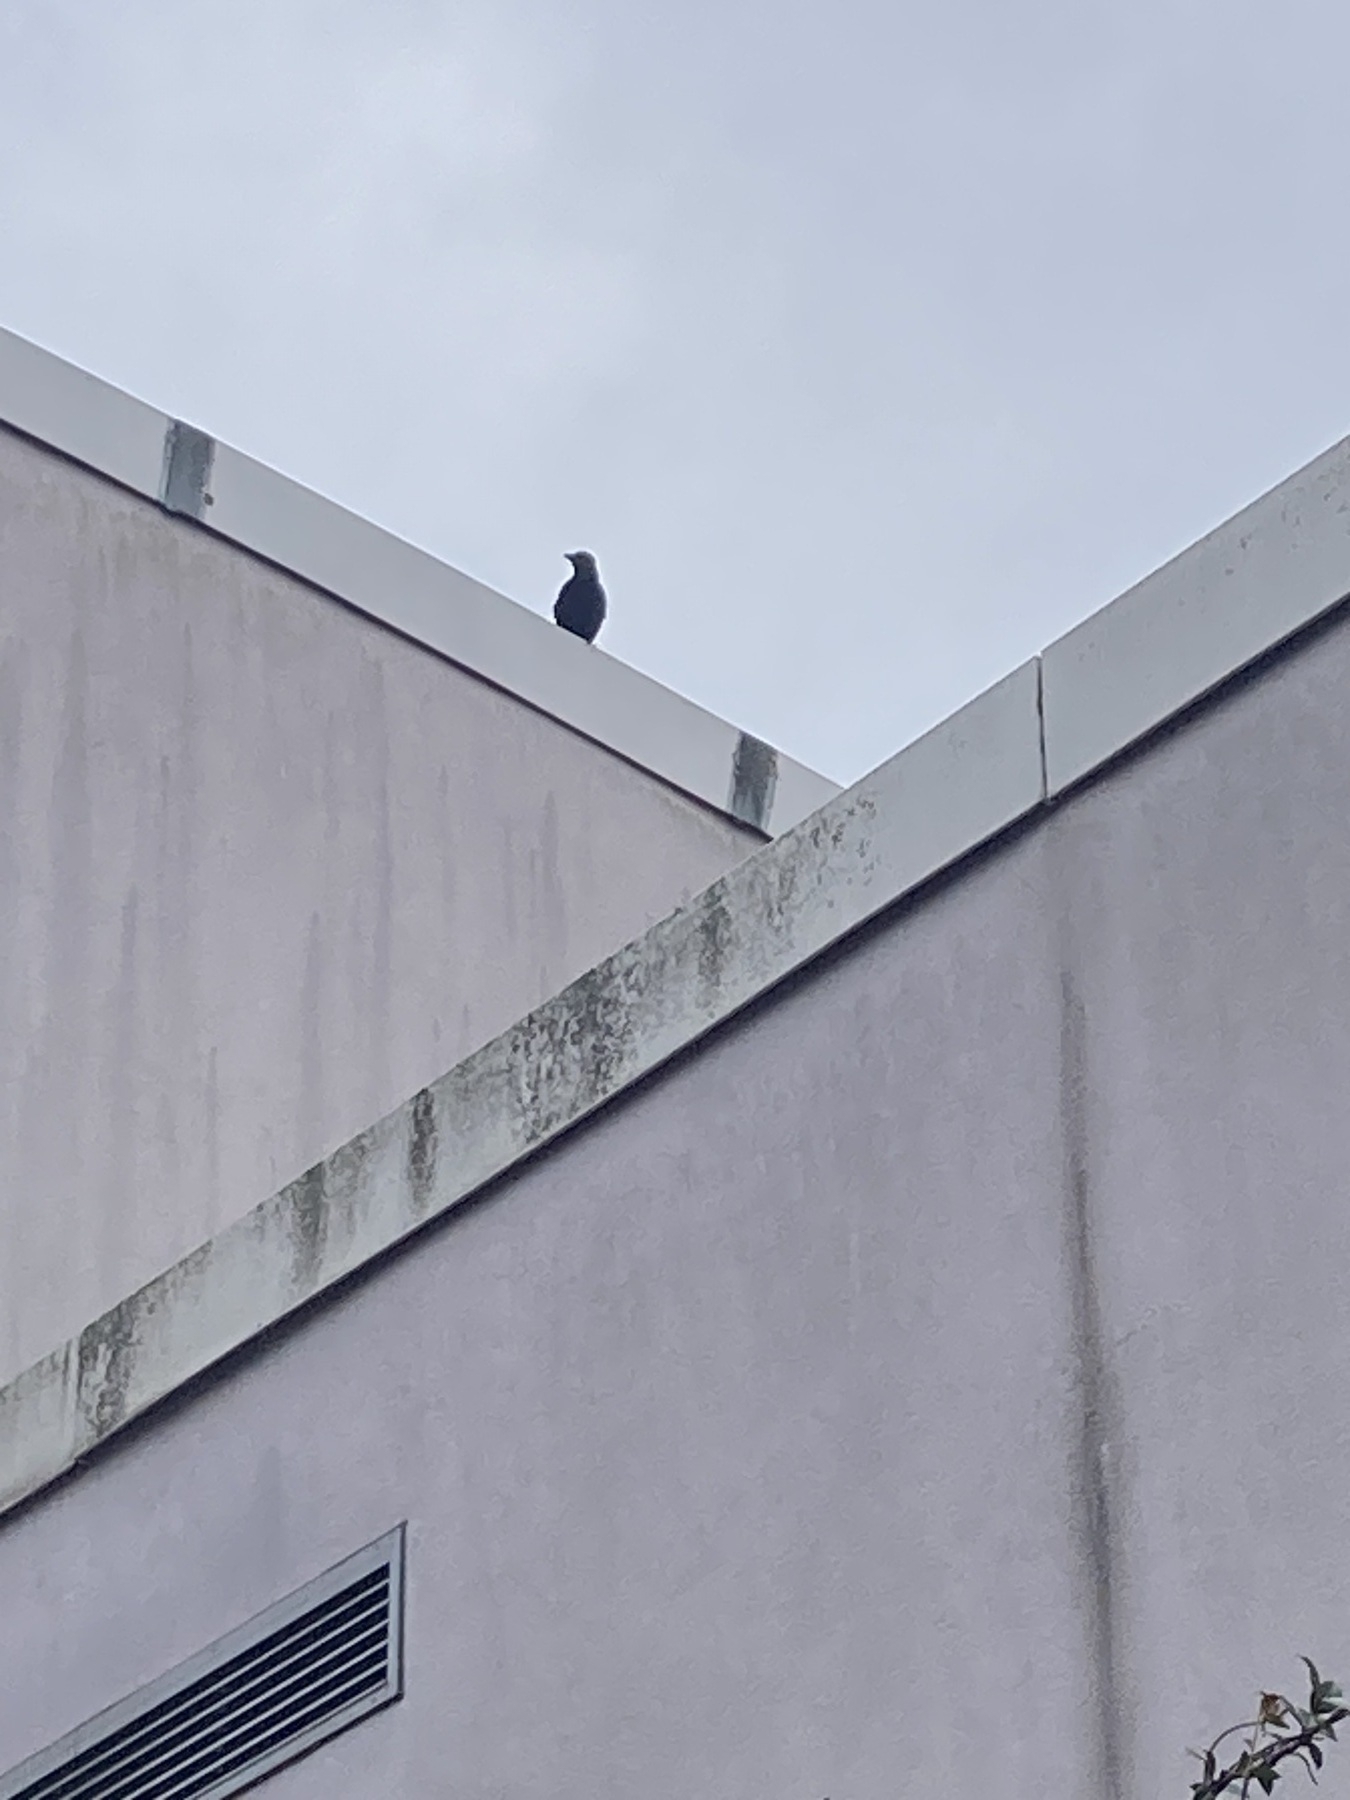 A crow watches from the rooftop of an office building